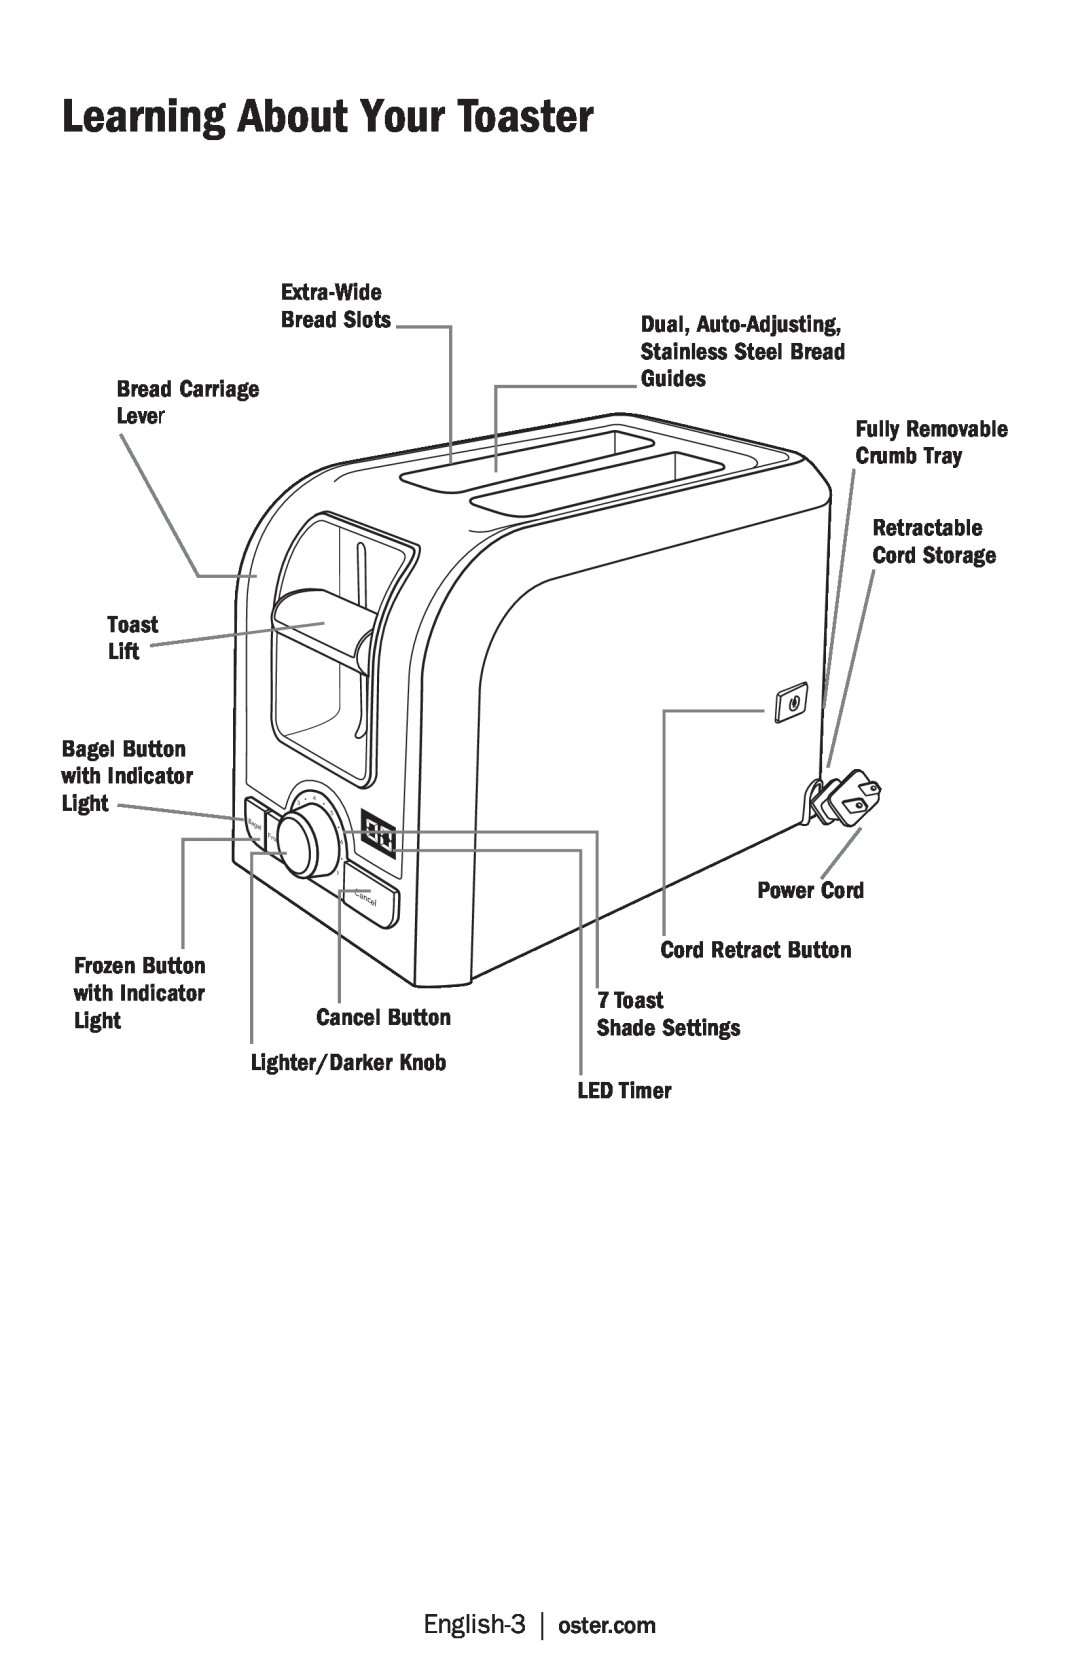 Oster TSSTRTS2S2 user manual Learning About Your Toaster, English-3 oster.com 